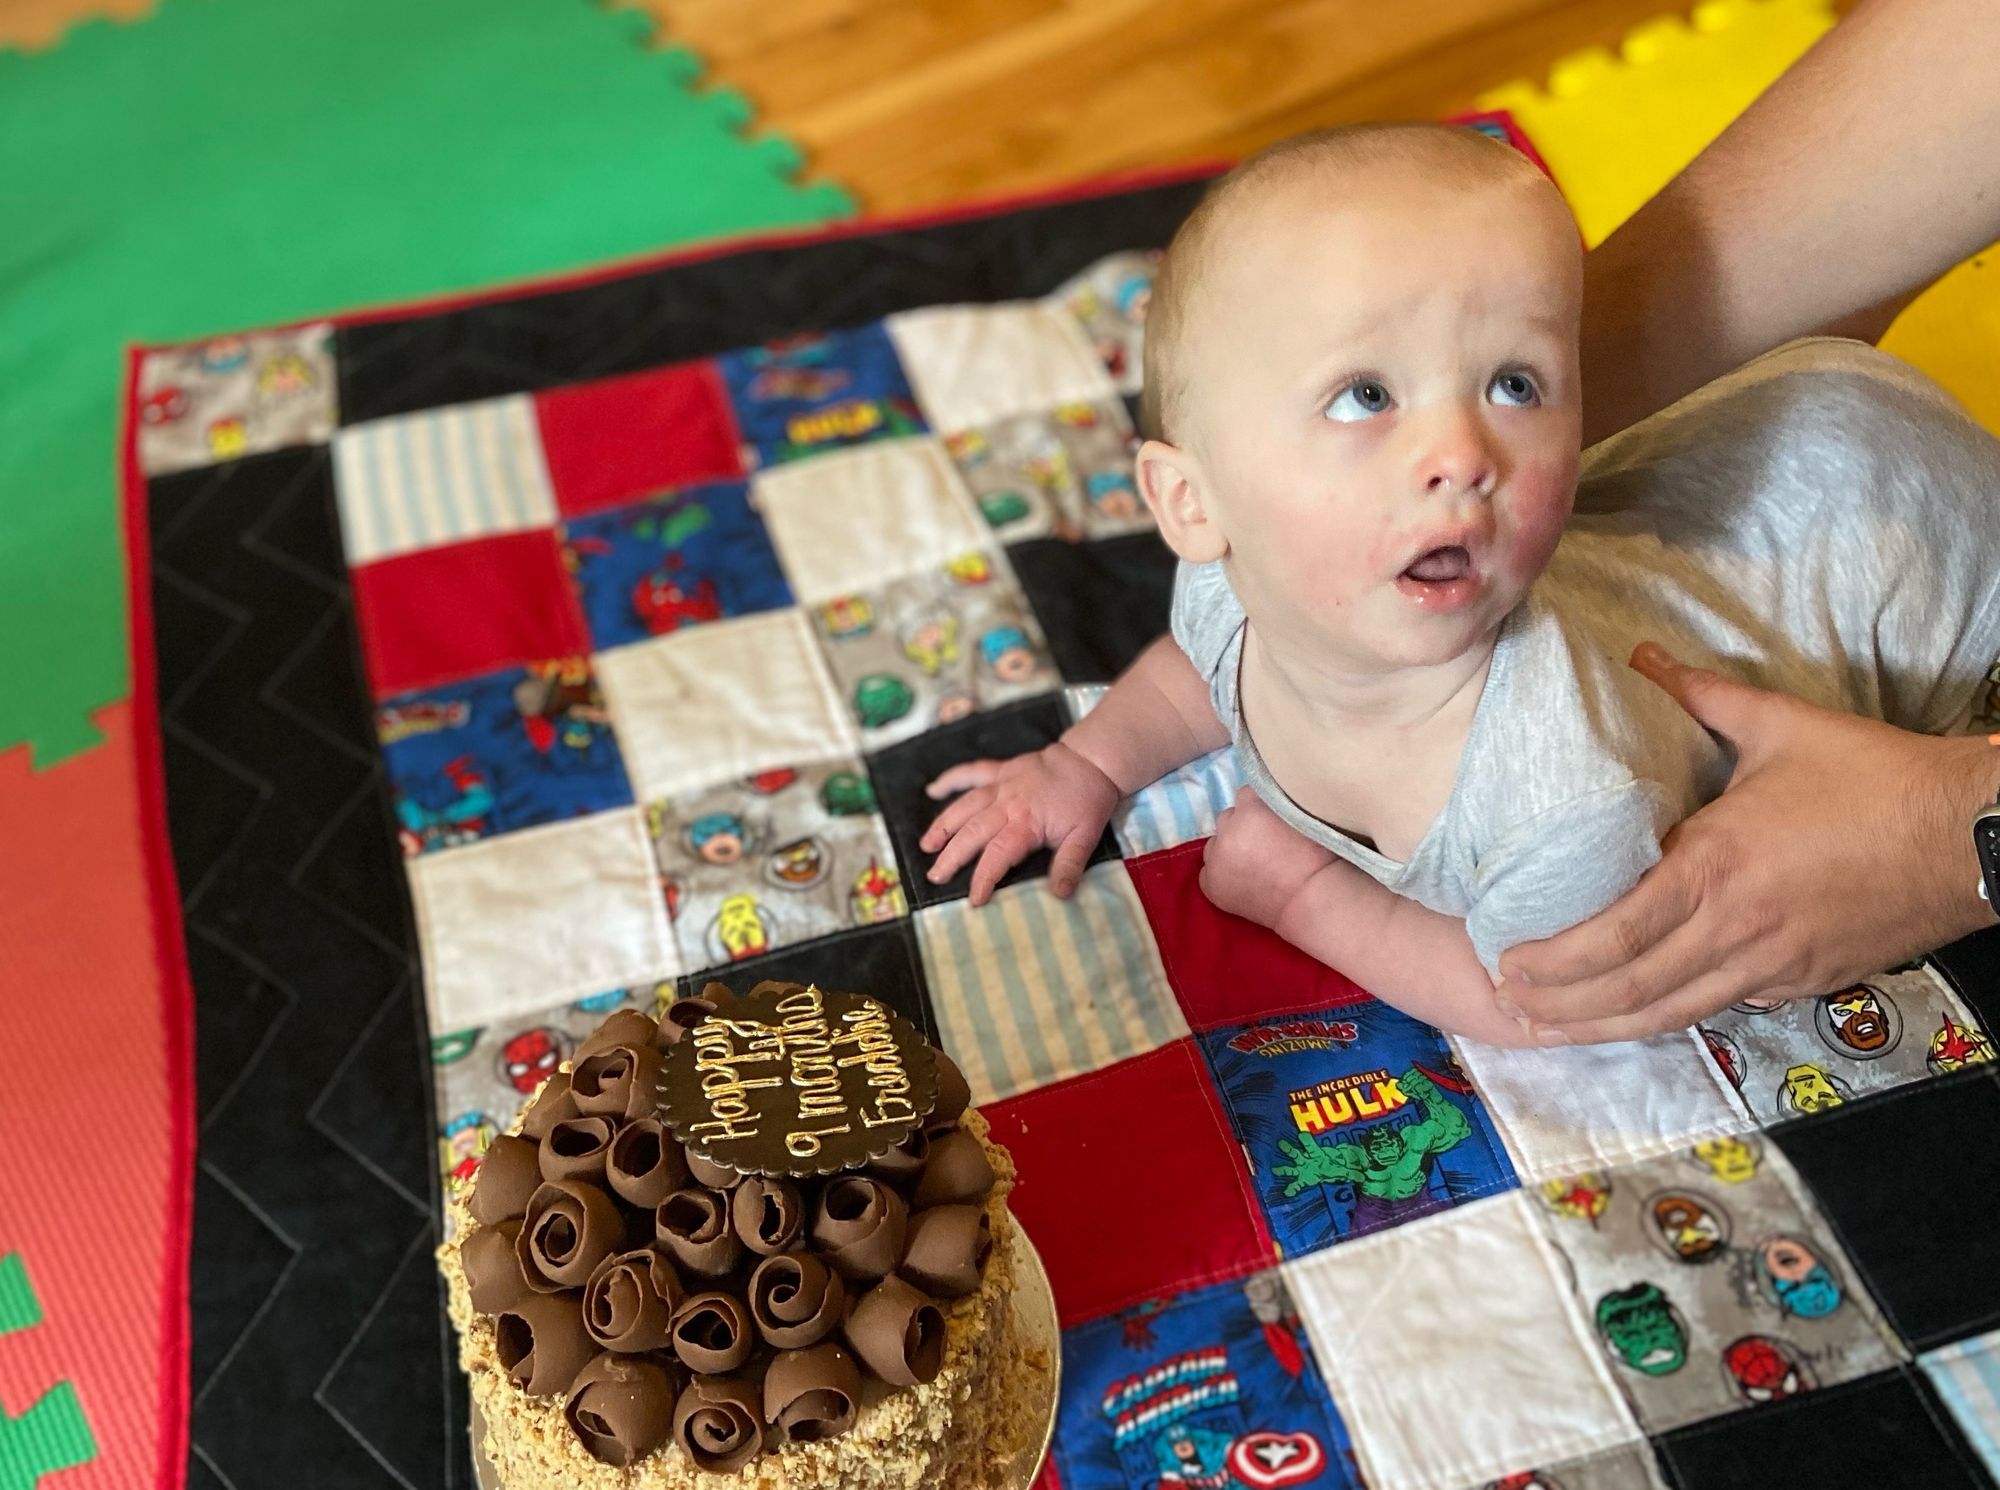 Freddie held on his stomach as he is posed in front of a cake.